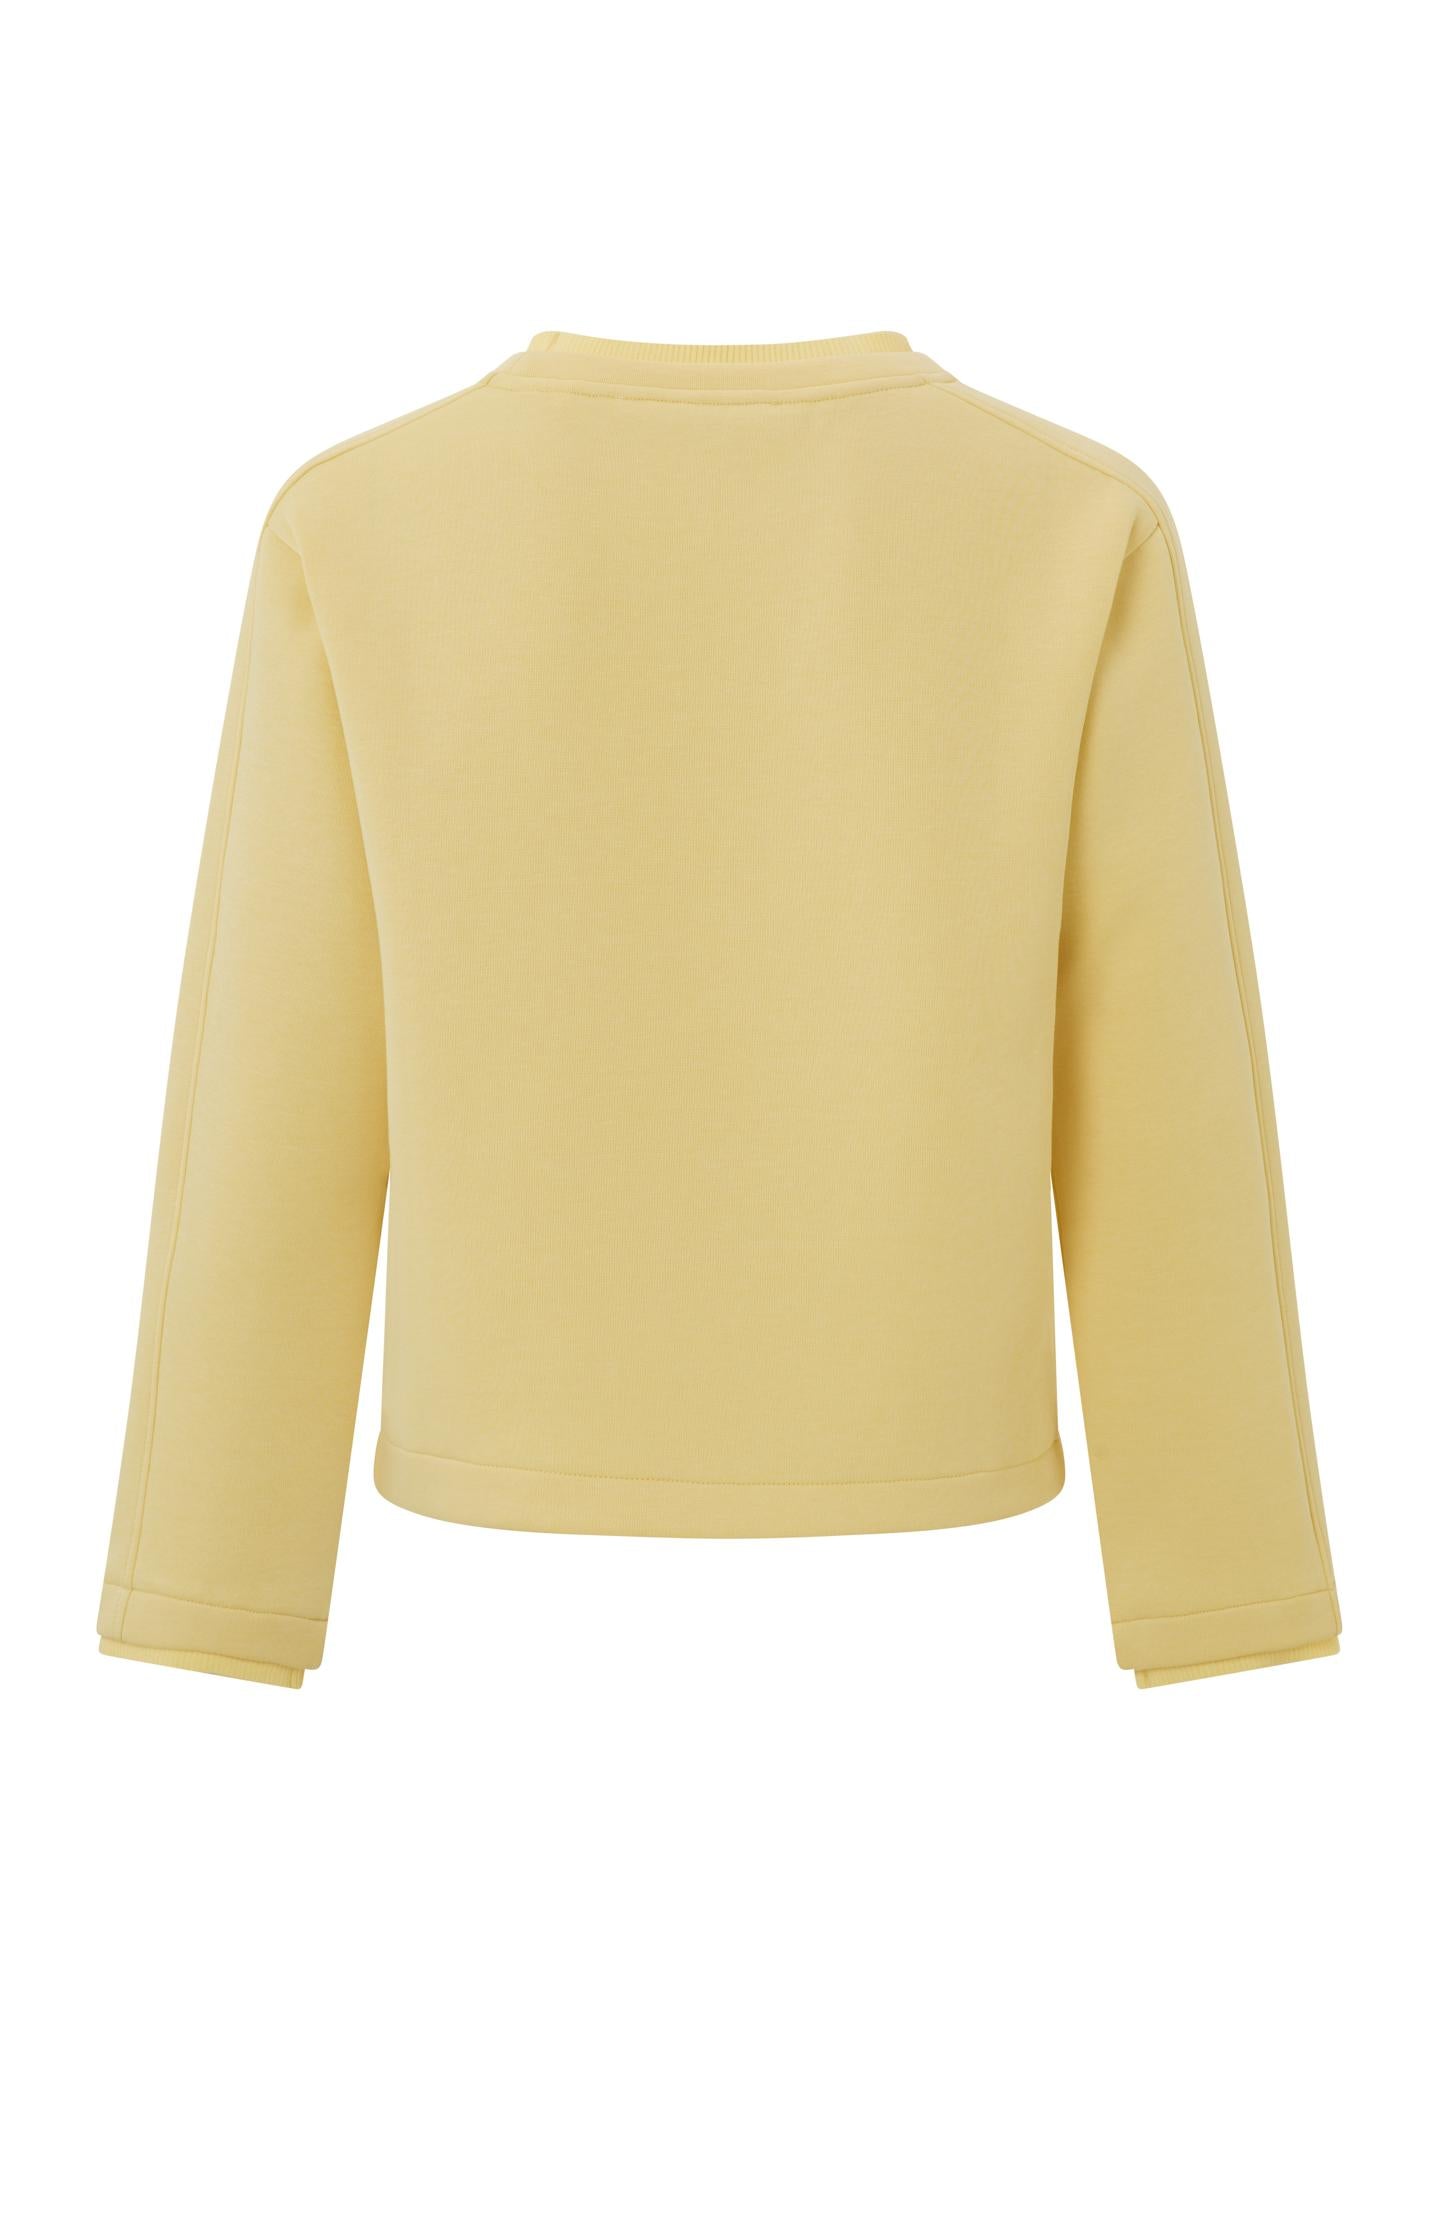 Sweatshirt with round neck, long sleeves and rib details